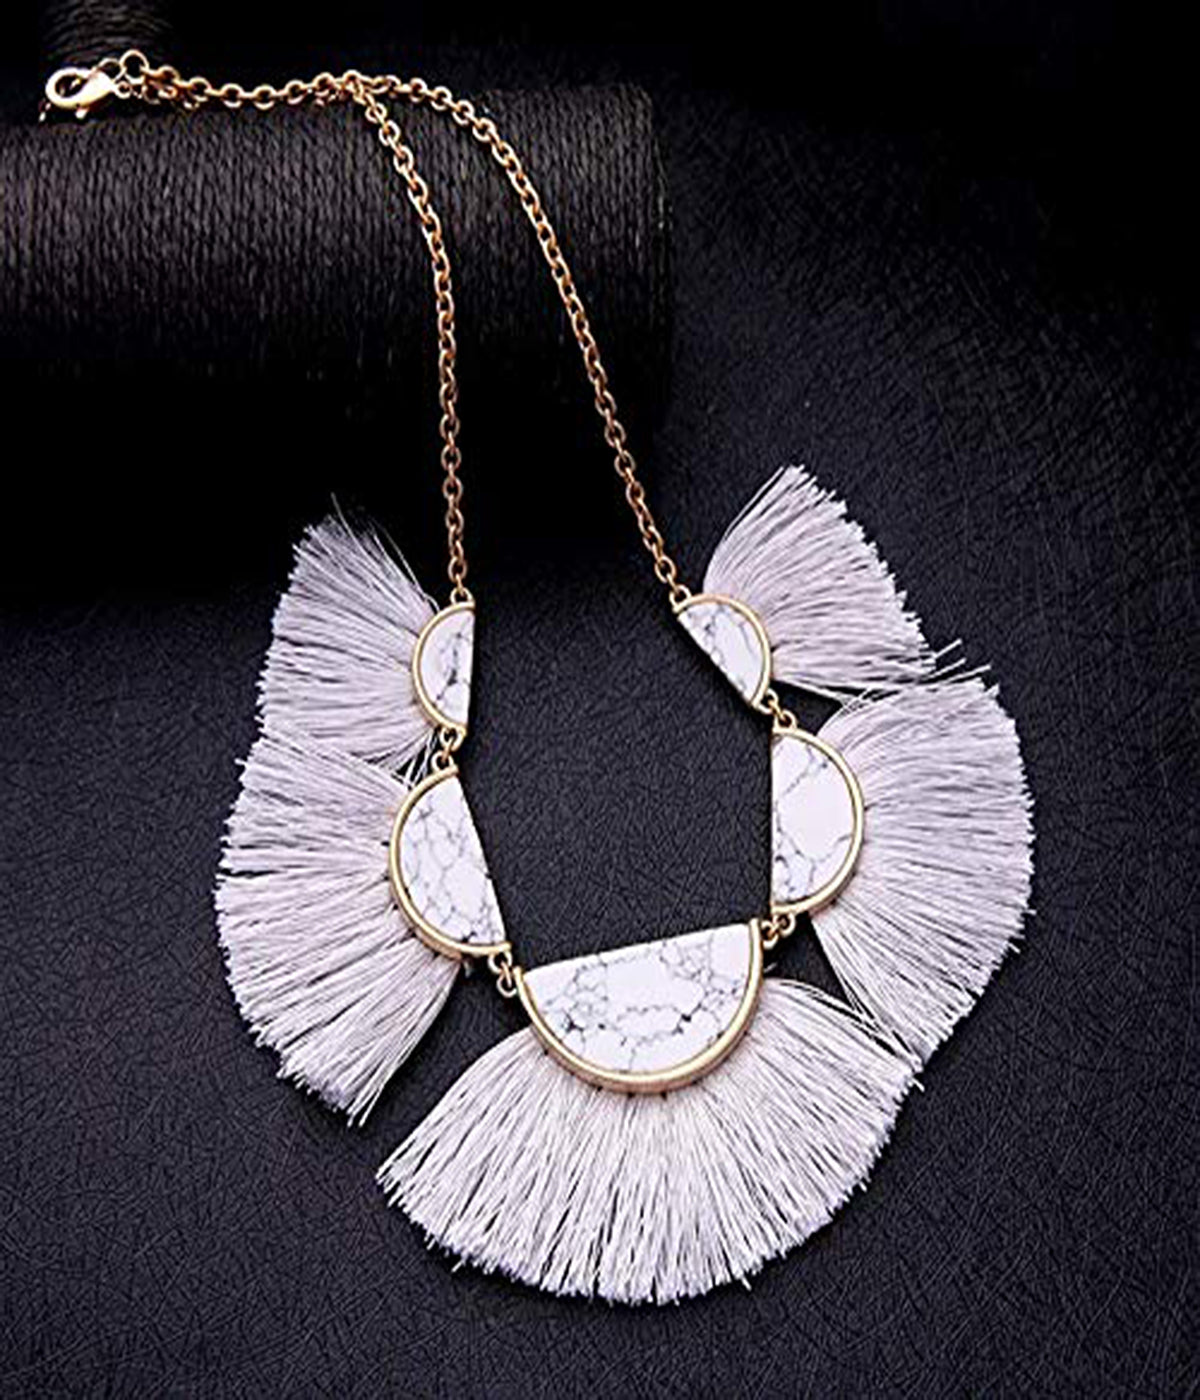 White Semi Circle Marble Necklace with Thread Tassels Jewellery for Women - Coral Tree 